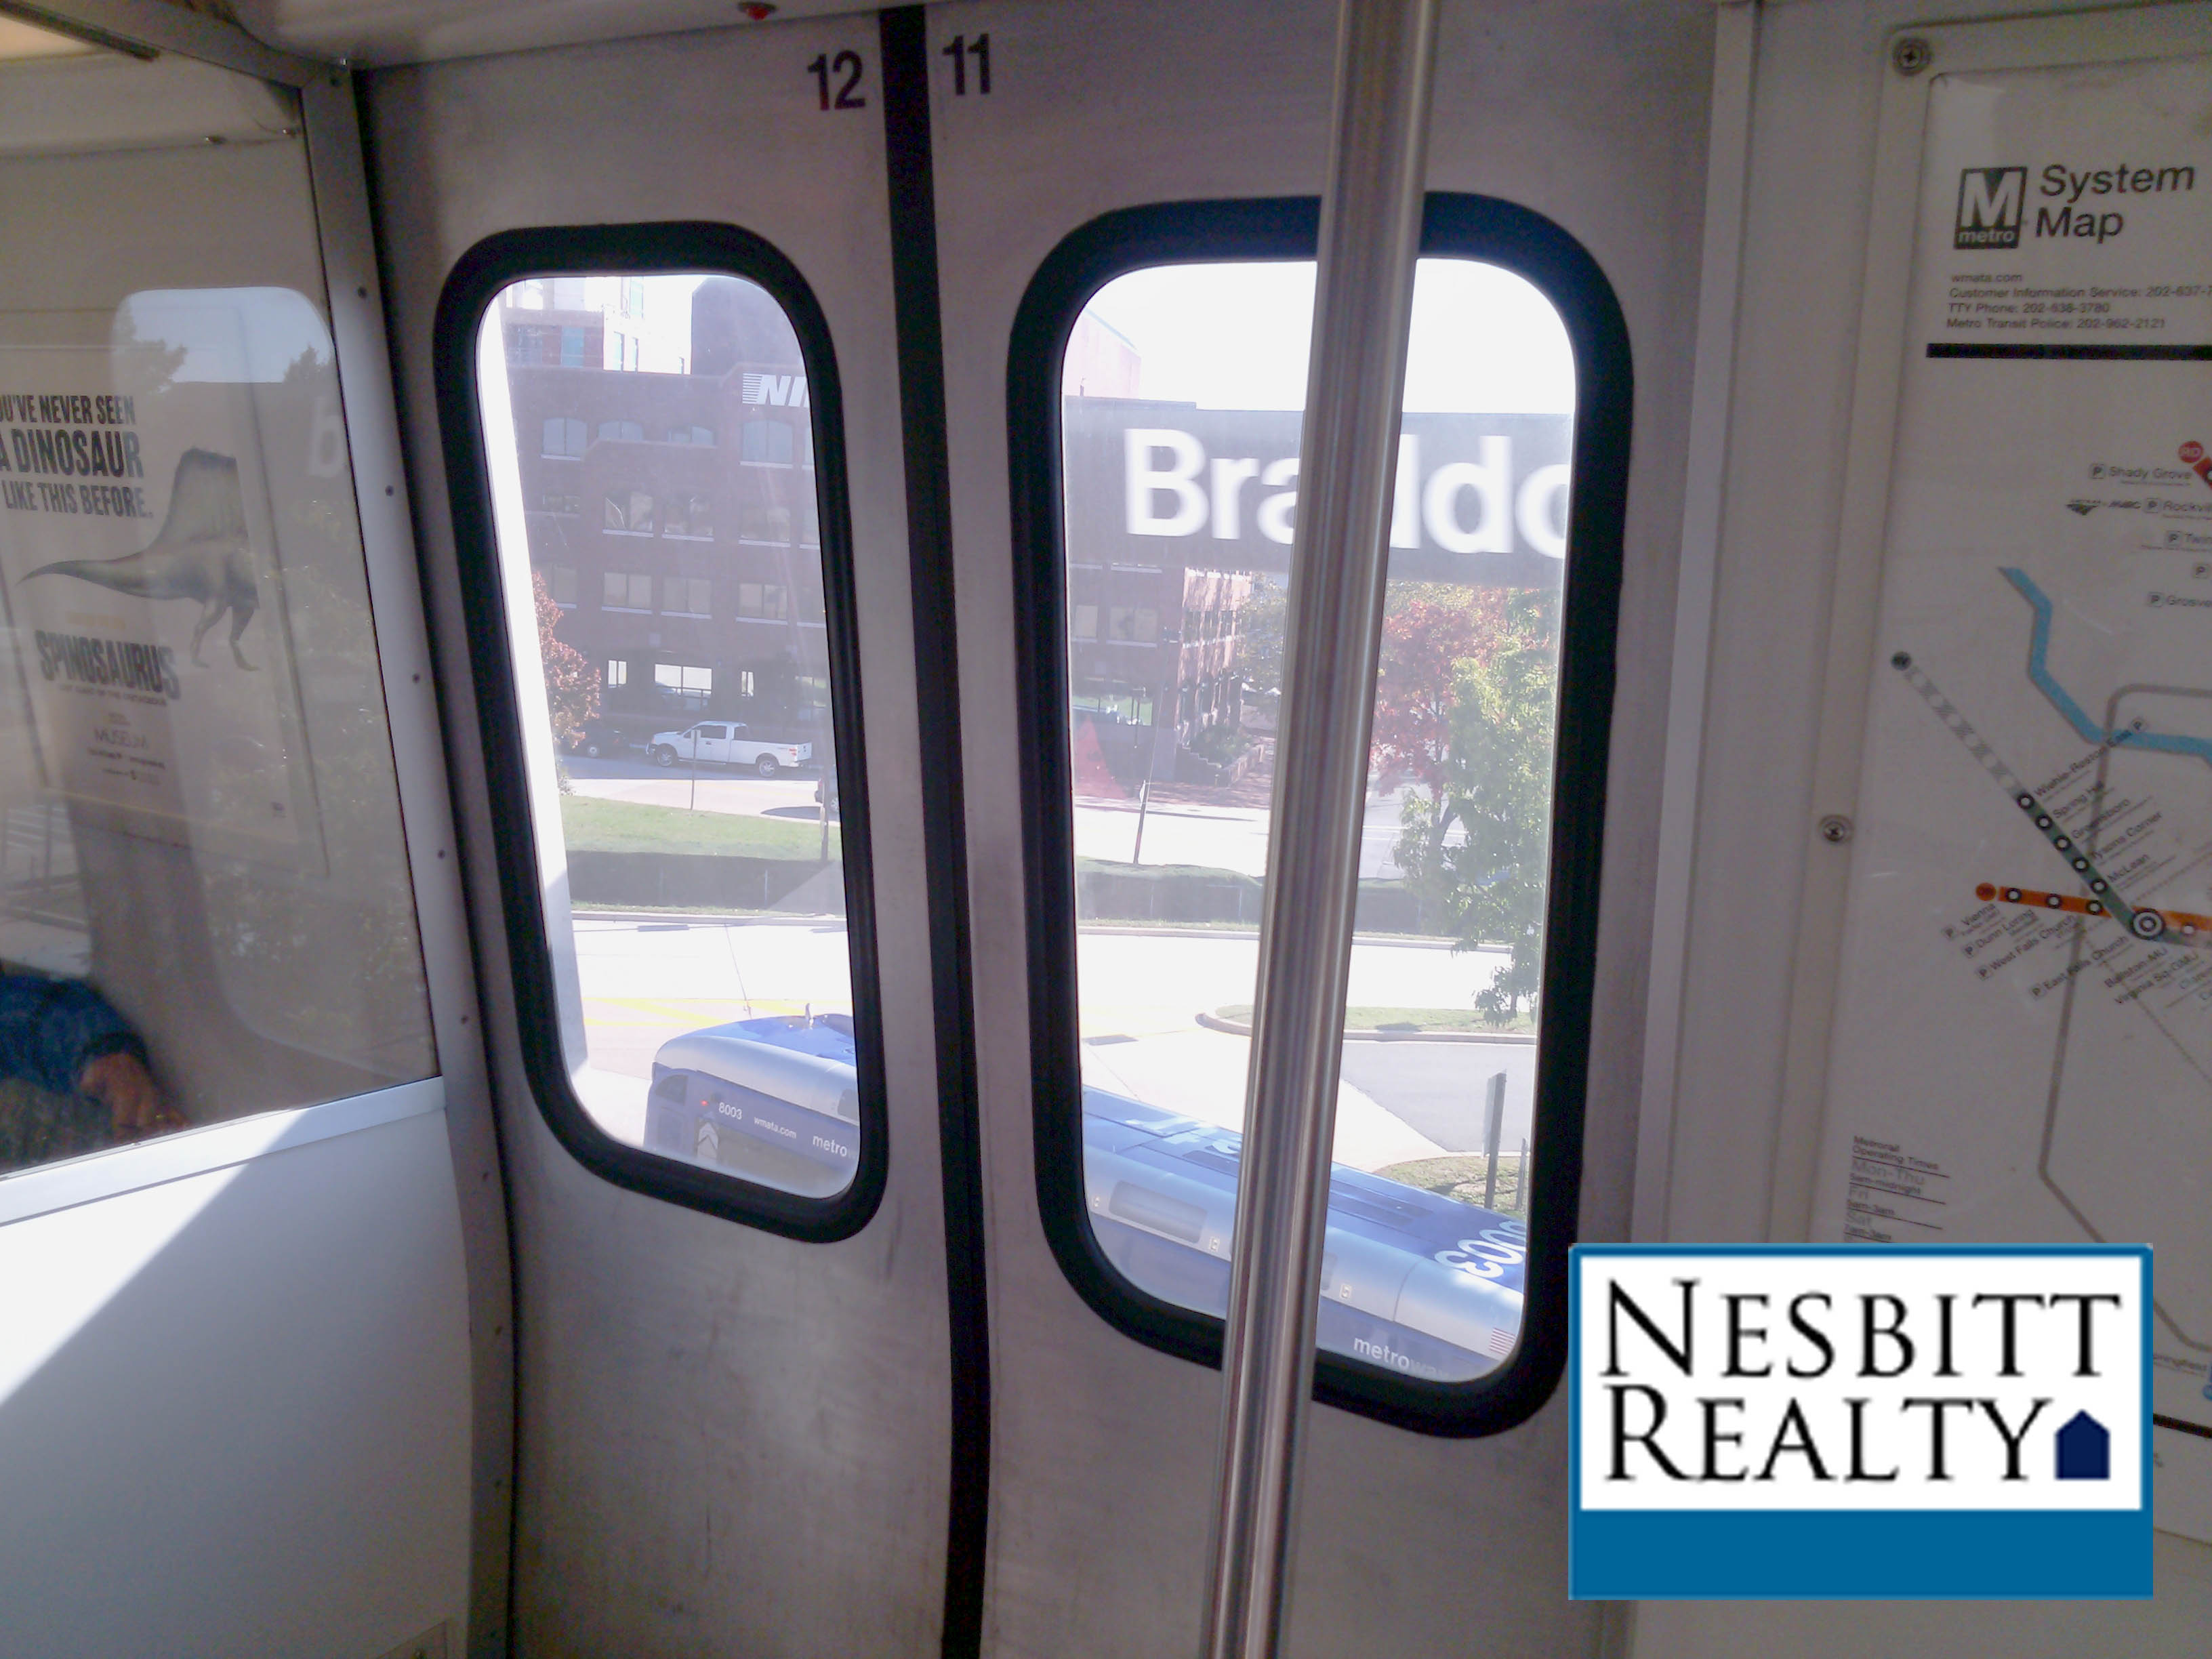 To buy and sell property near Braddock Road, contact Nesbitt Realty